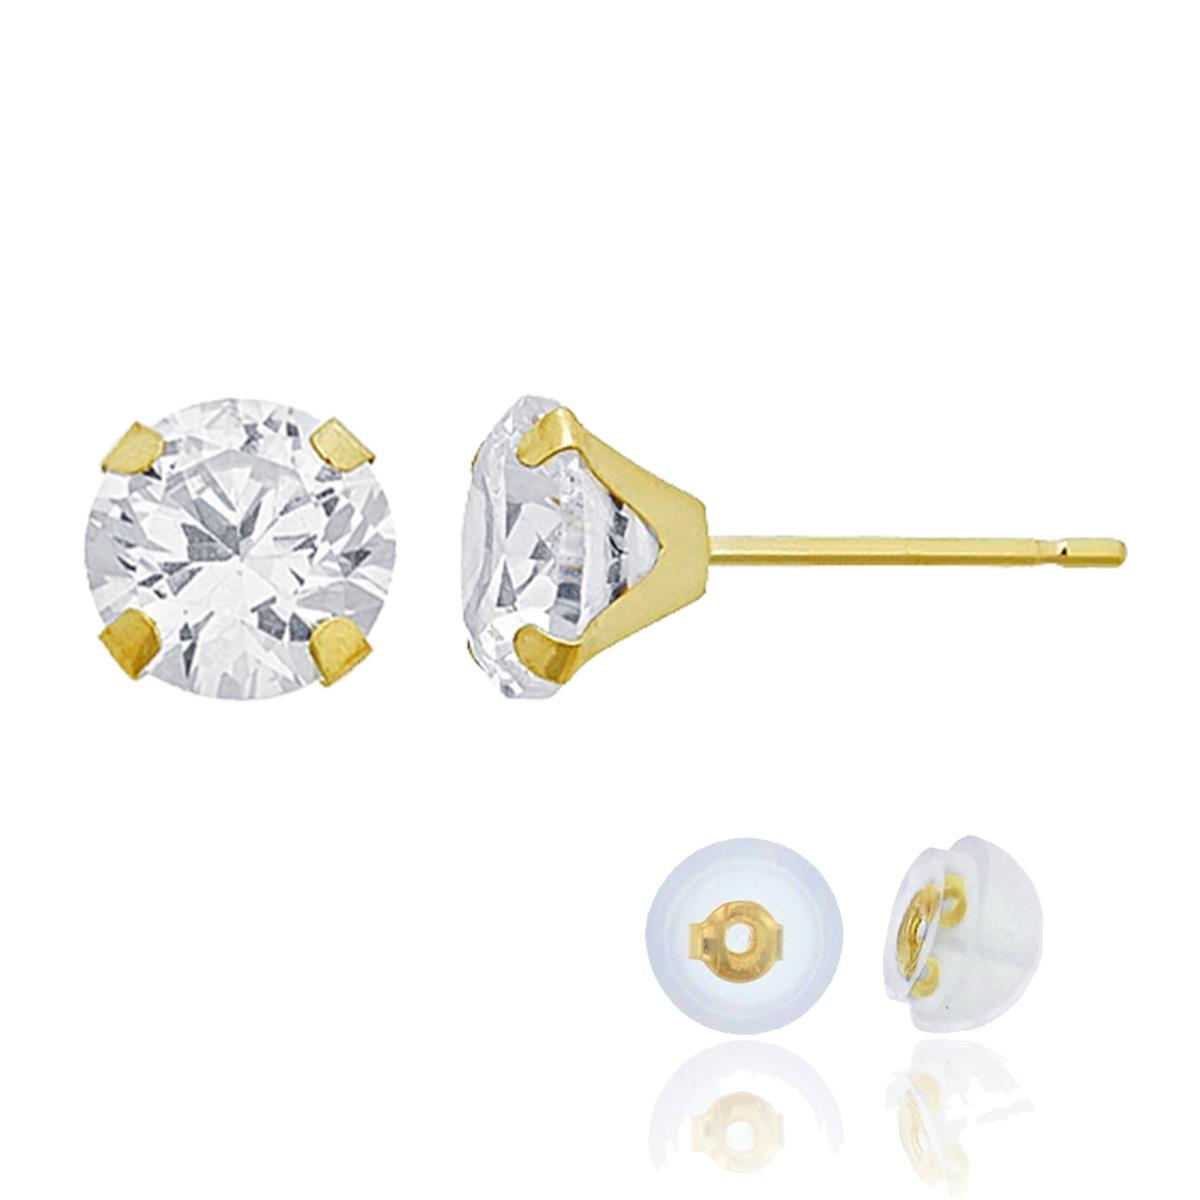 10K Yellow Gold 3mm AAA Round Cut Martini Solitaire Stud Earring with Silicone Back